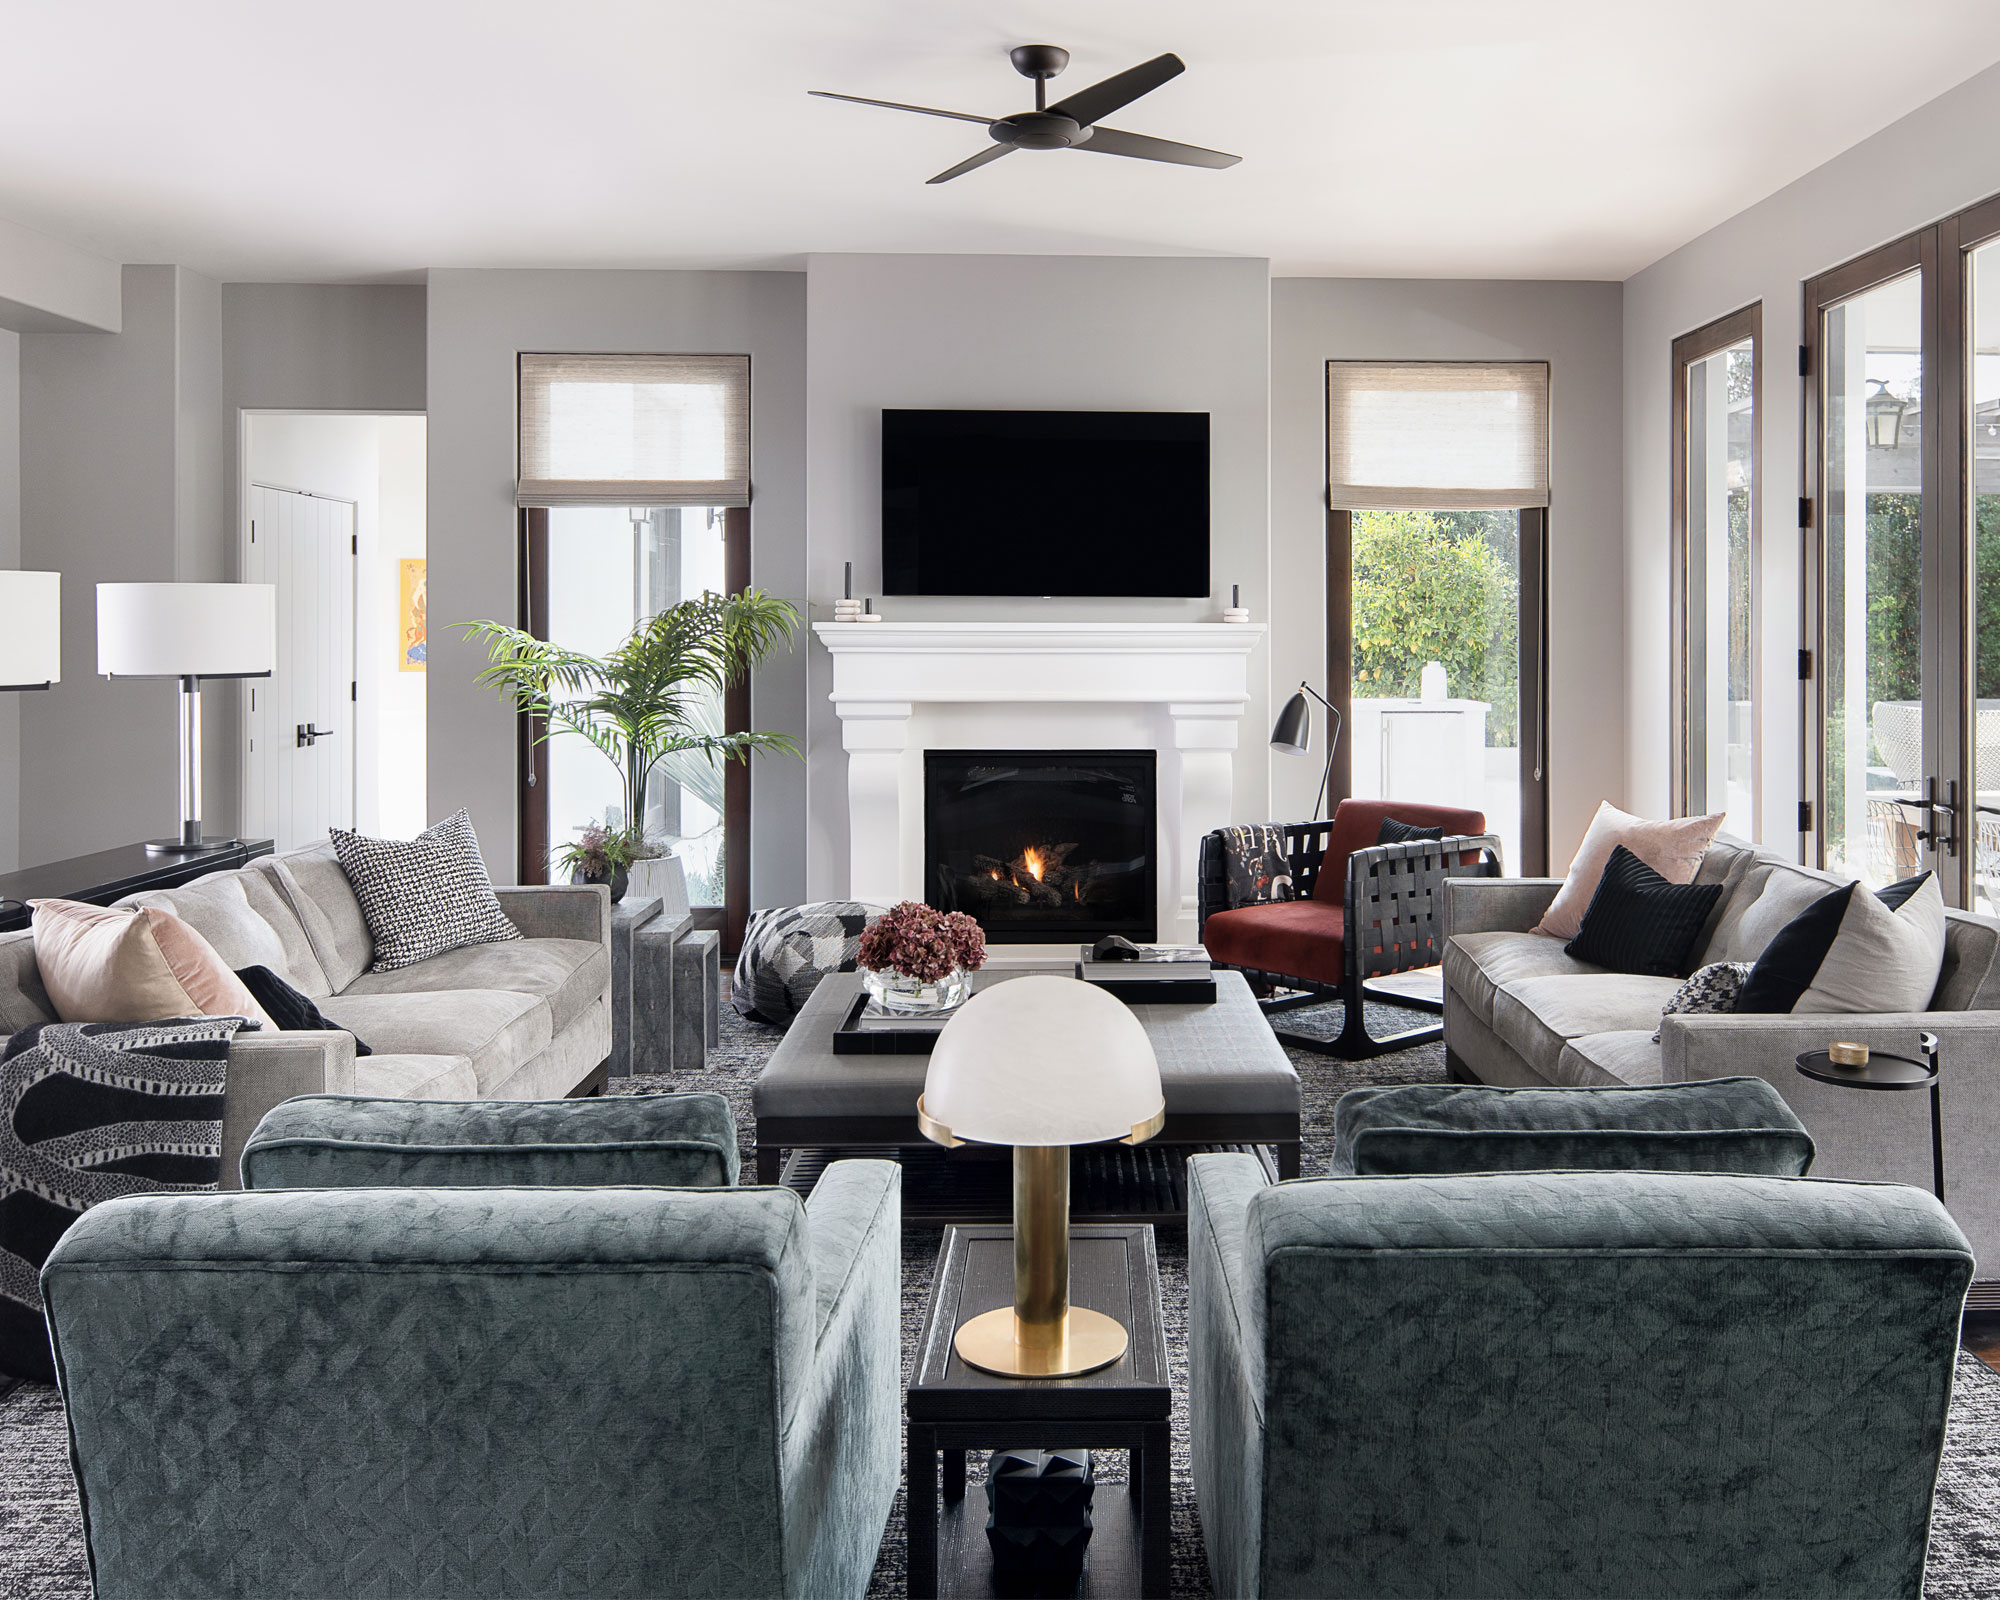 family room tv ideas : 10 tips for styling a tv |